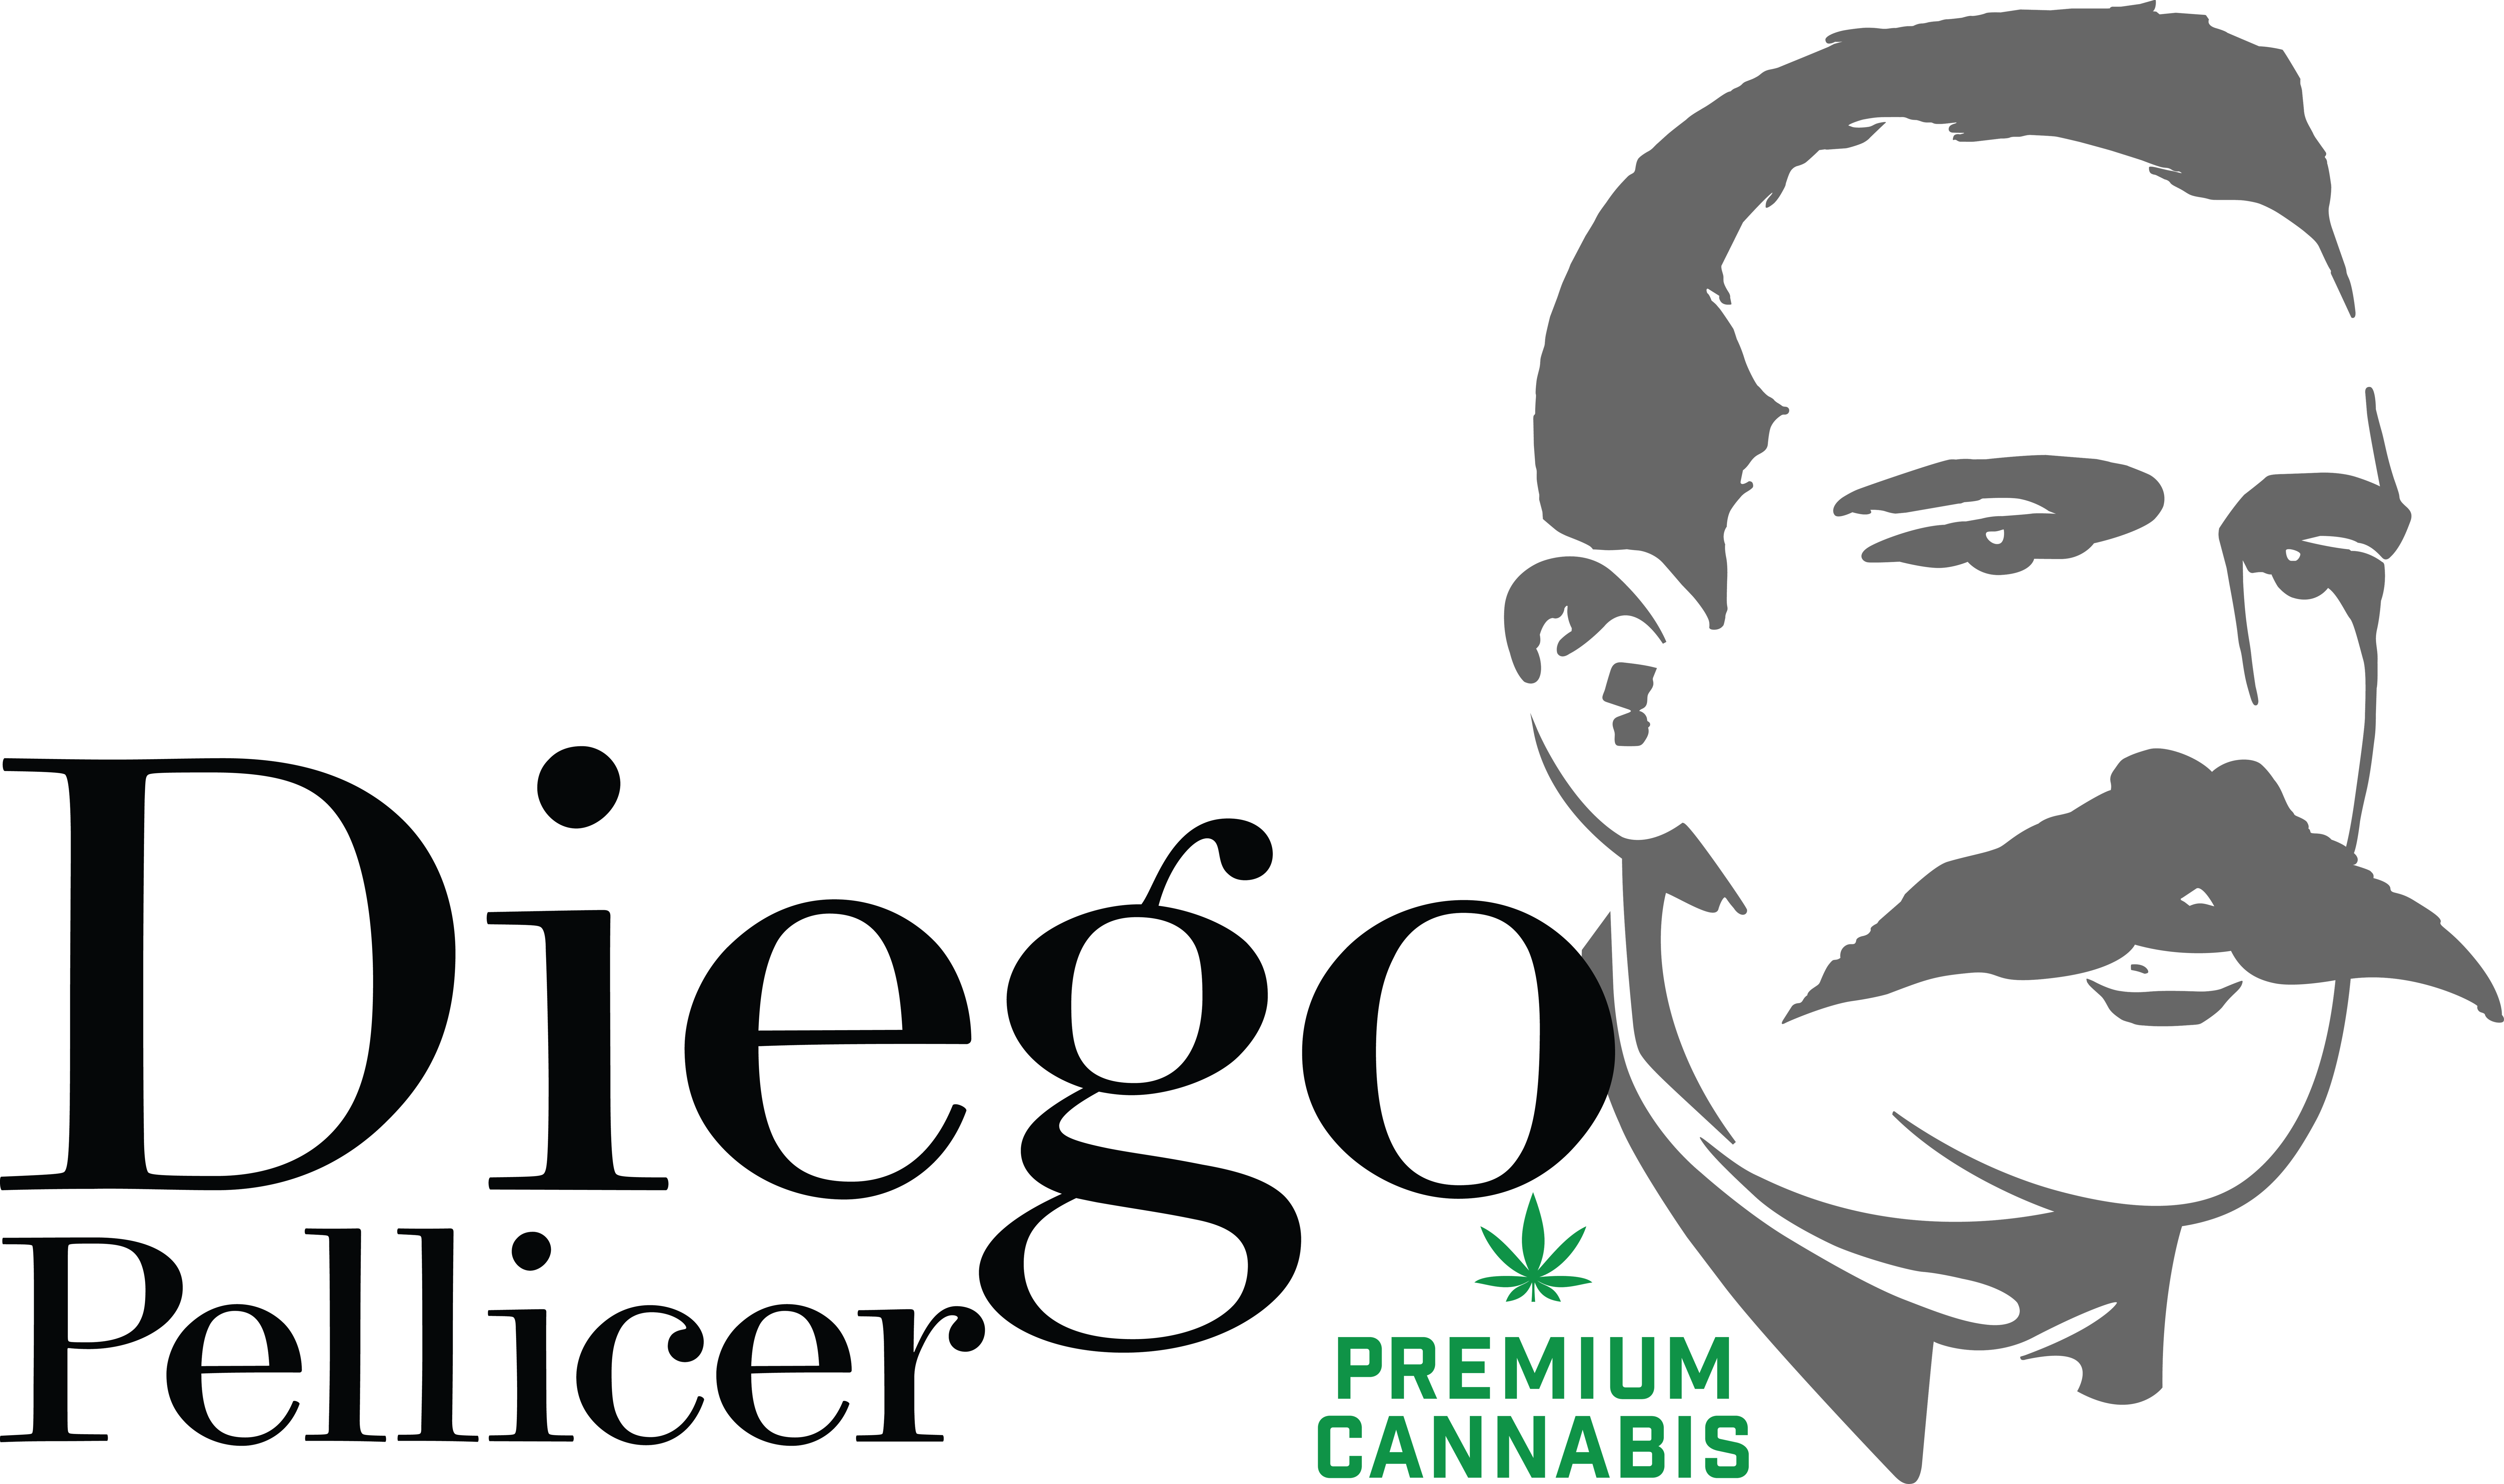 Diego Pellicer Worldwide, Inc. Signs Agreement to Acquire Hemp Choice Distribution, LLC